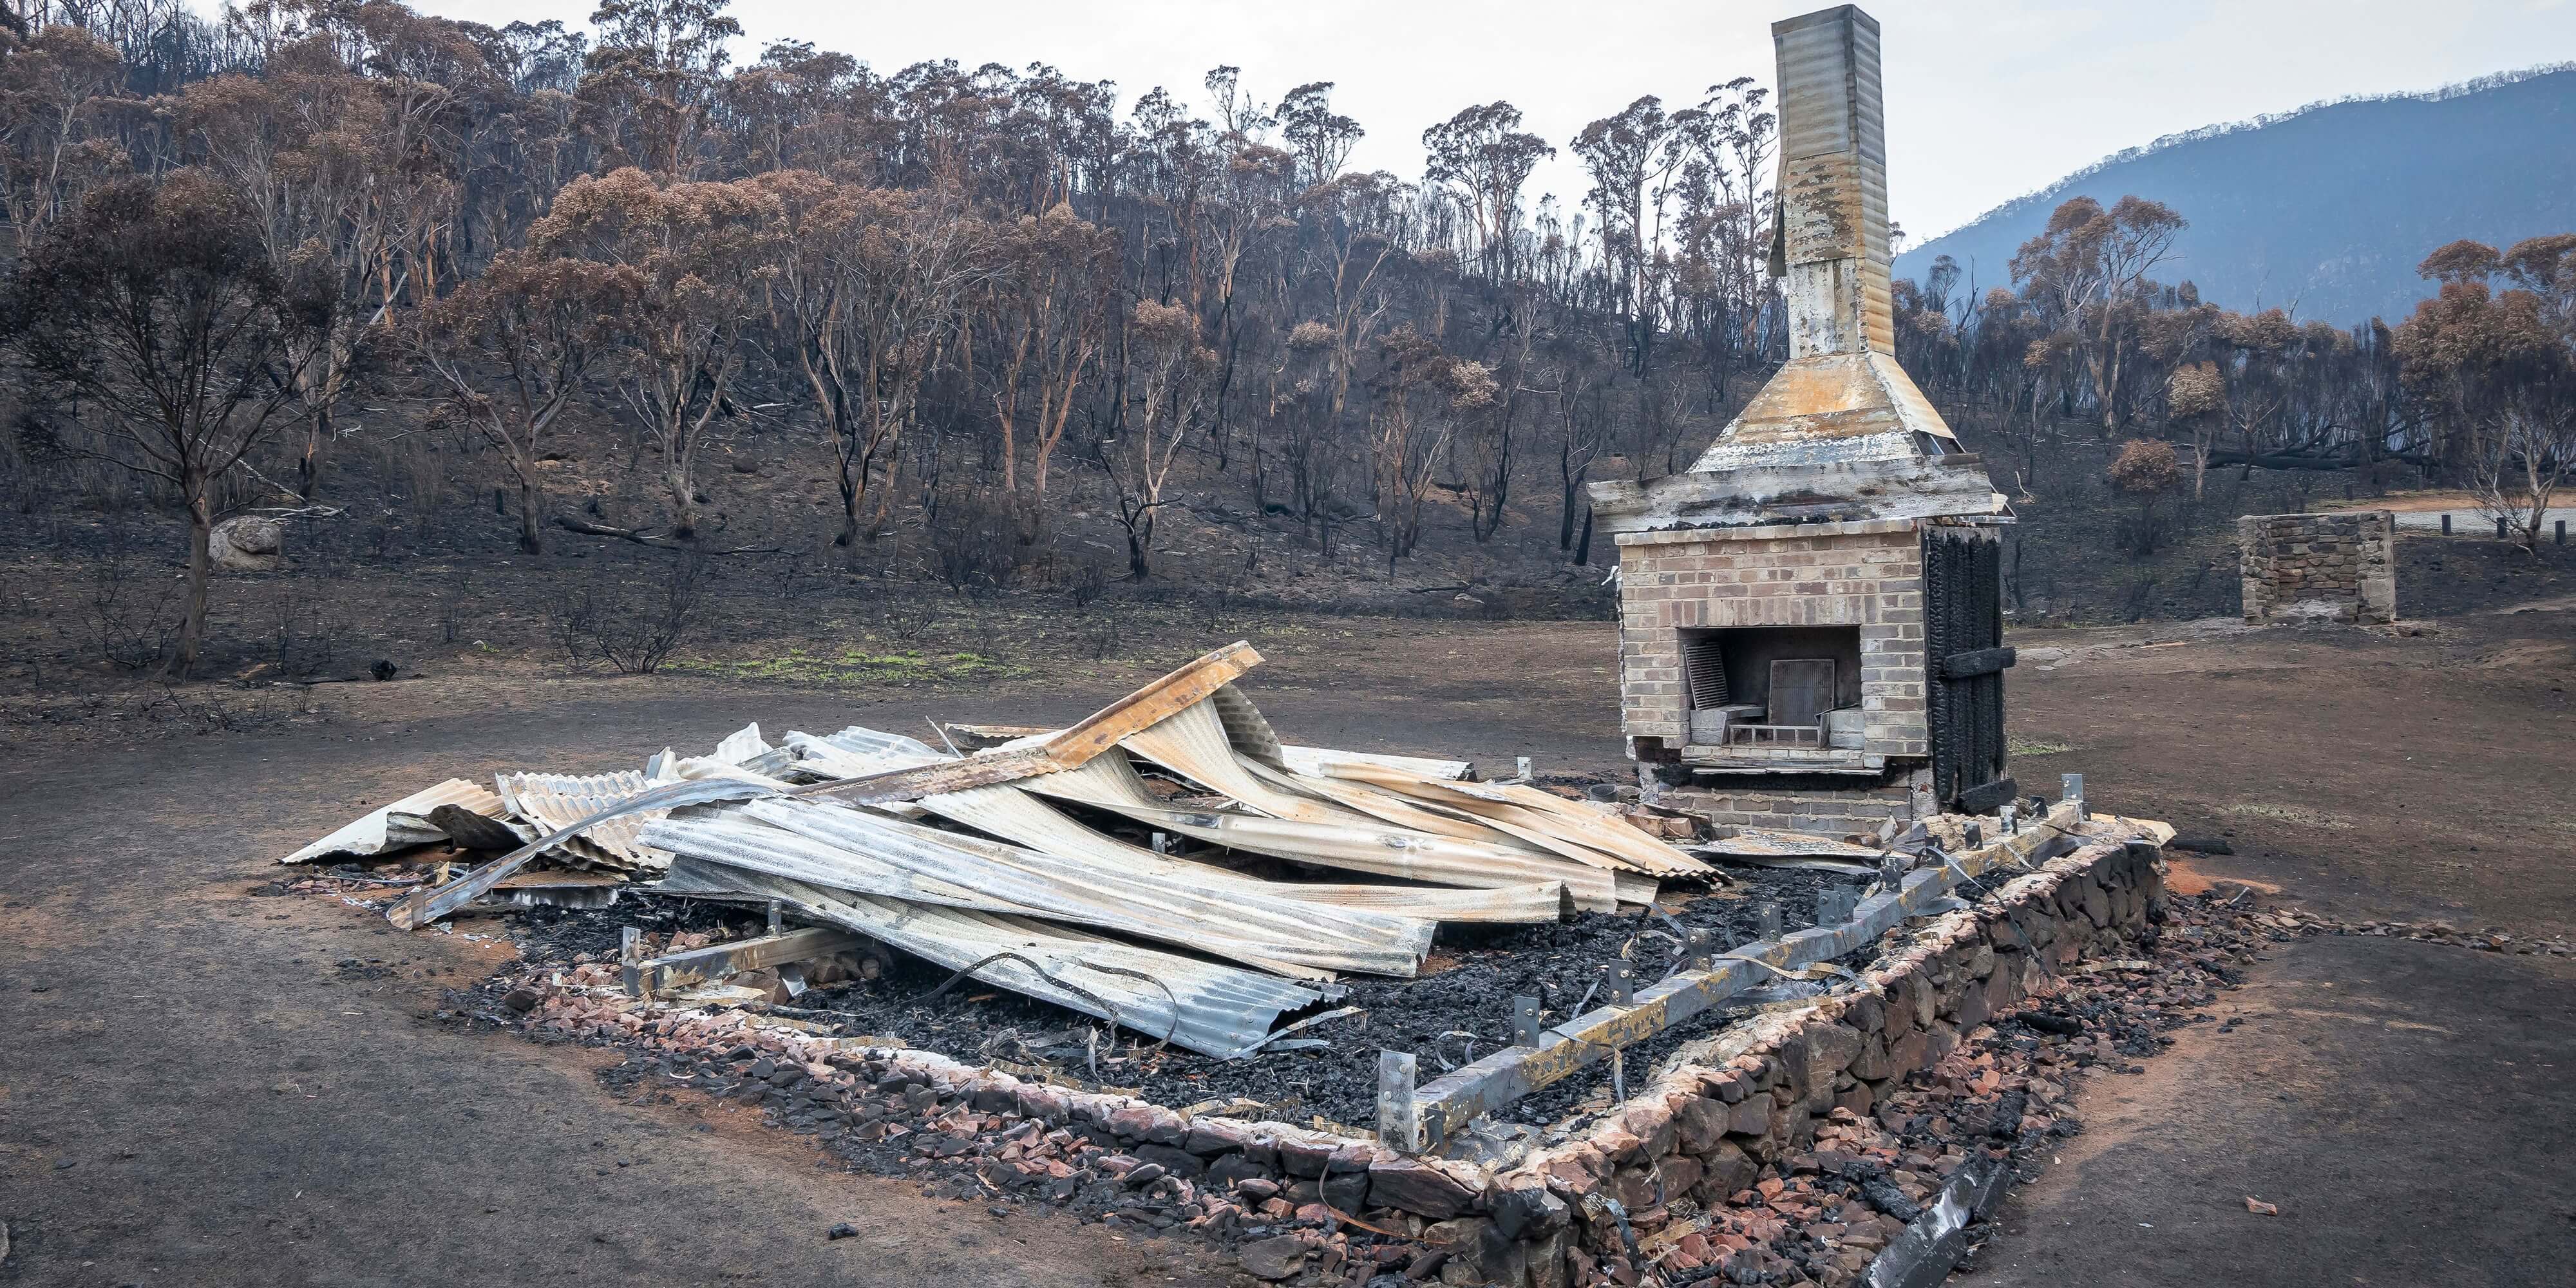 Remaining of a hut after dramatic bushfires